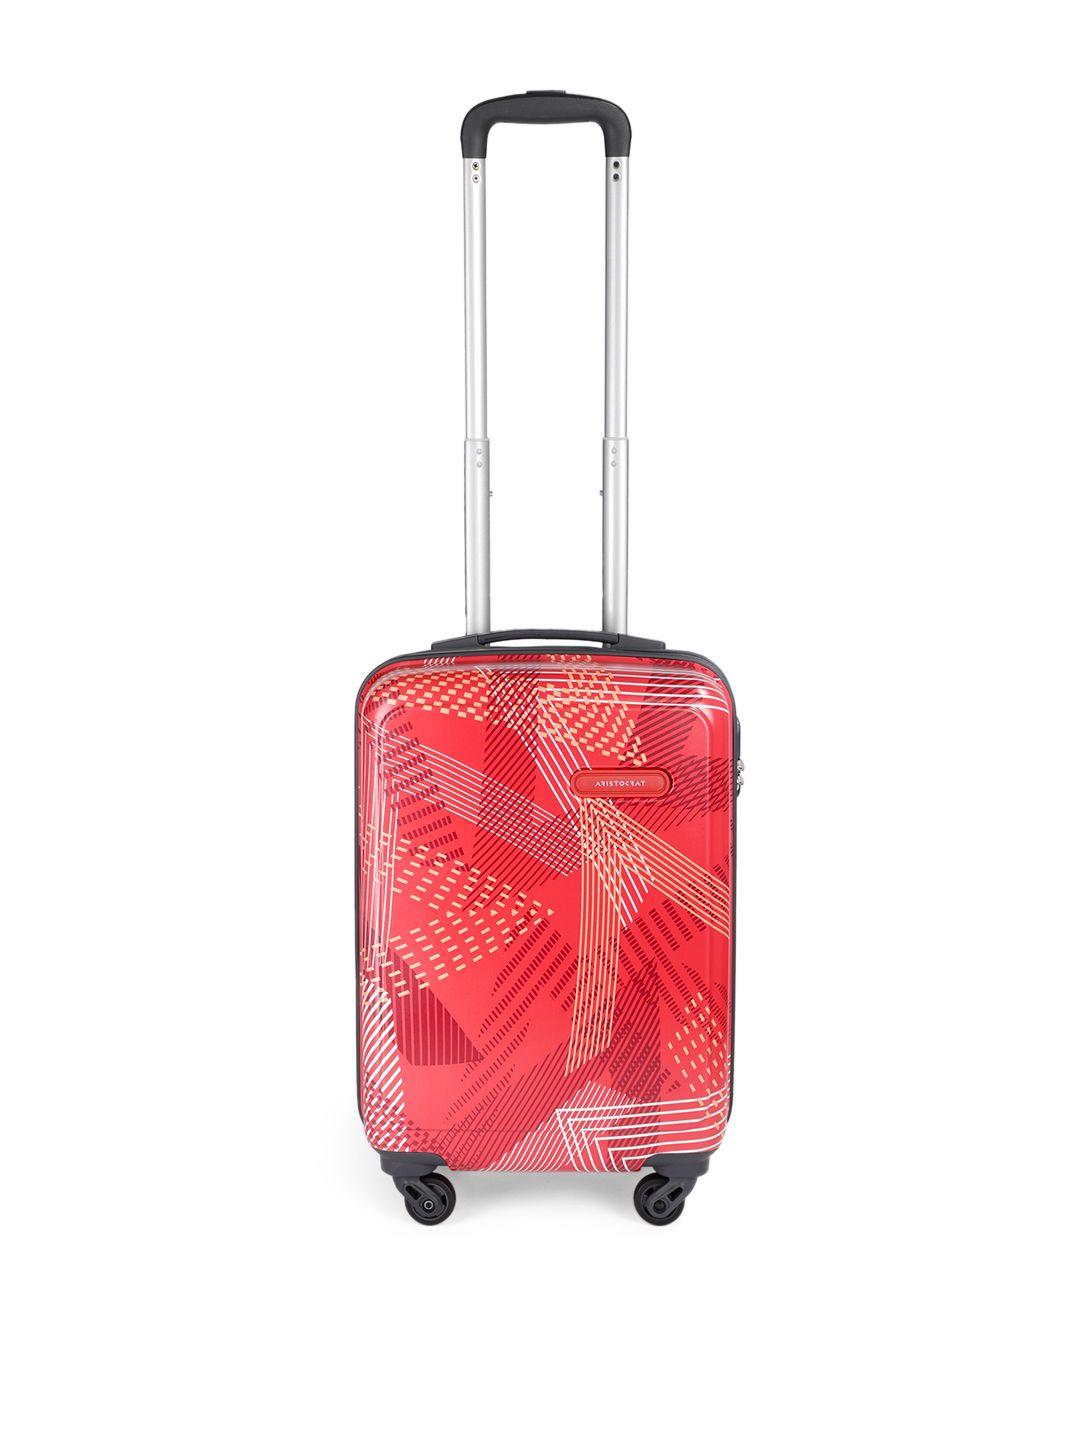 aristocrat-red-printed-dual-edge-55-cabin-trolley-suitcase